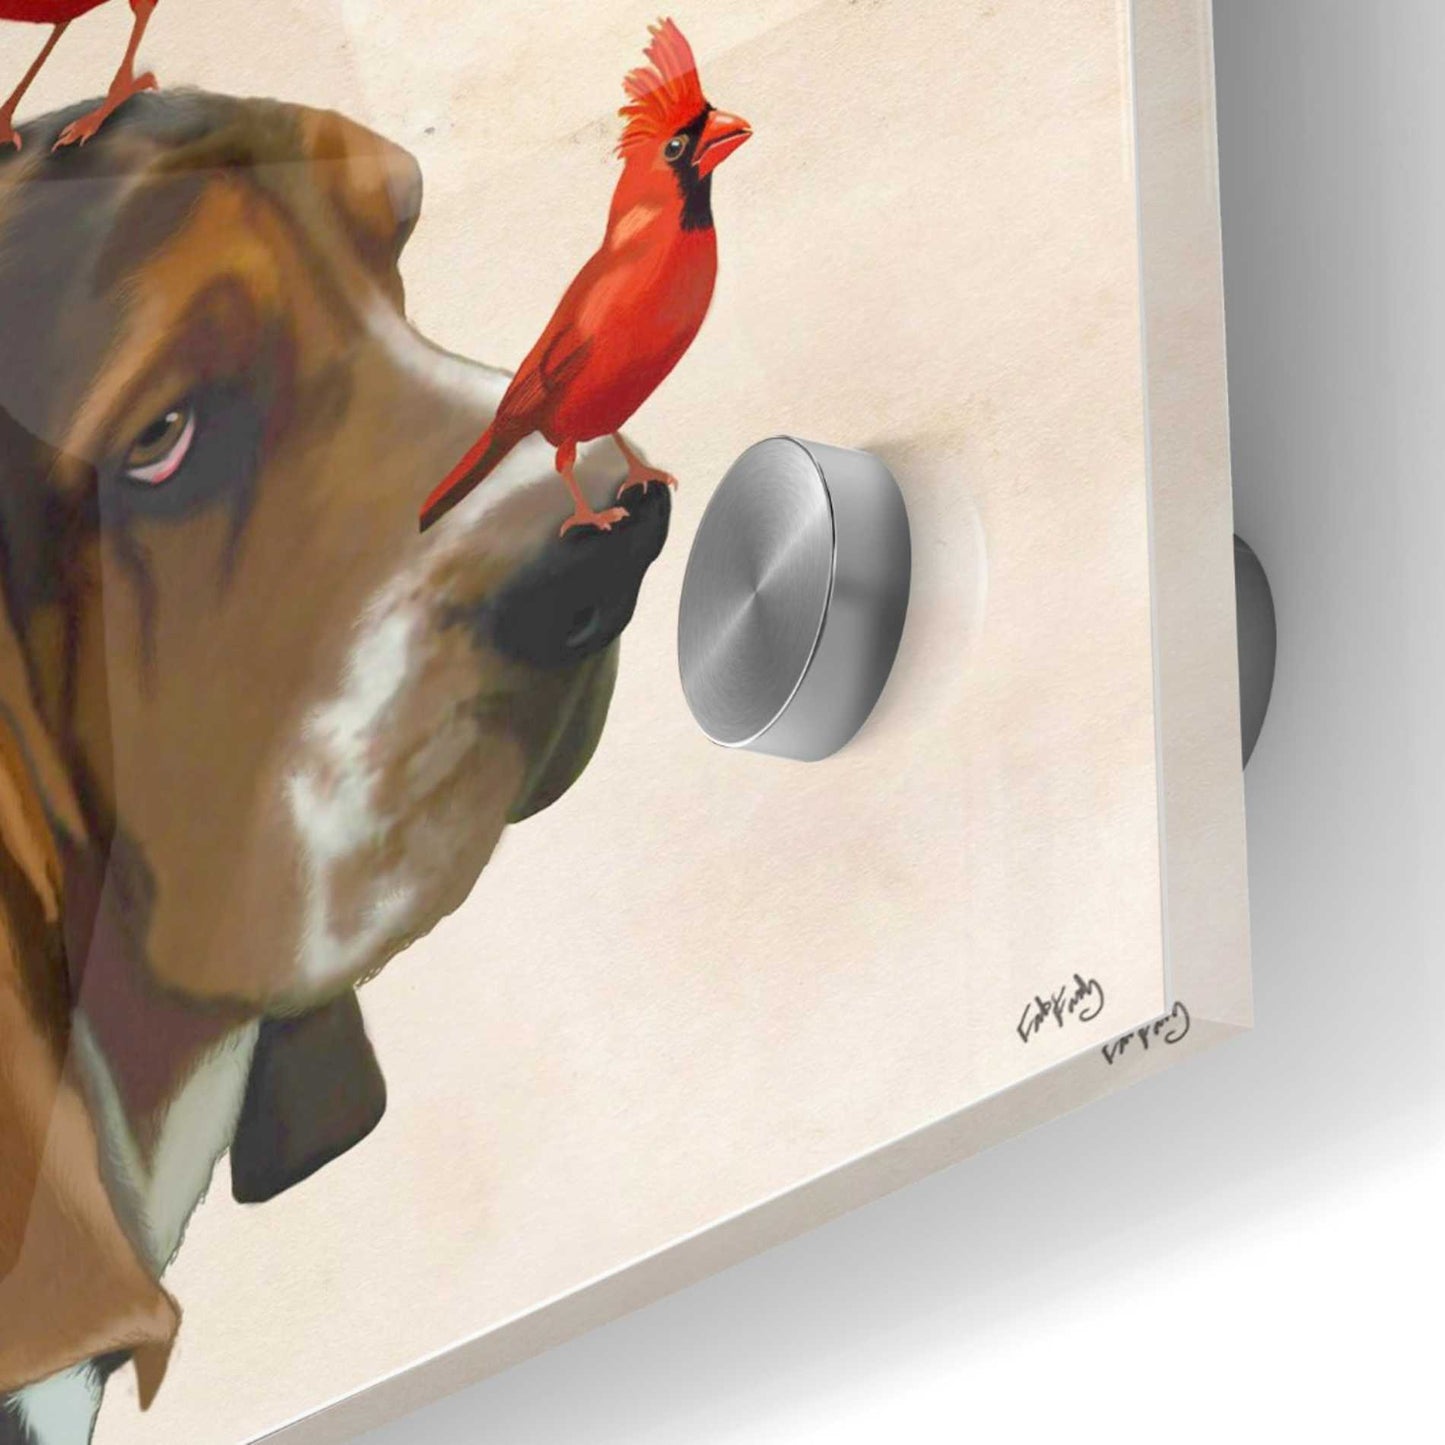 Epic Art 'Basset Hound and Birds' by Fab Funky Acrylic Glass Wall Art,36x36